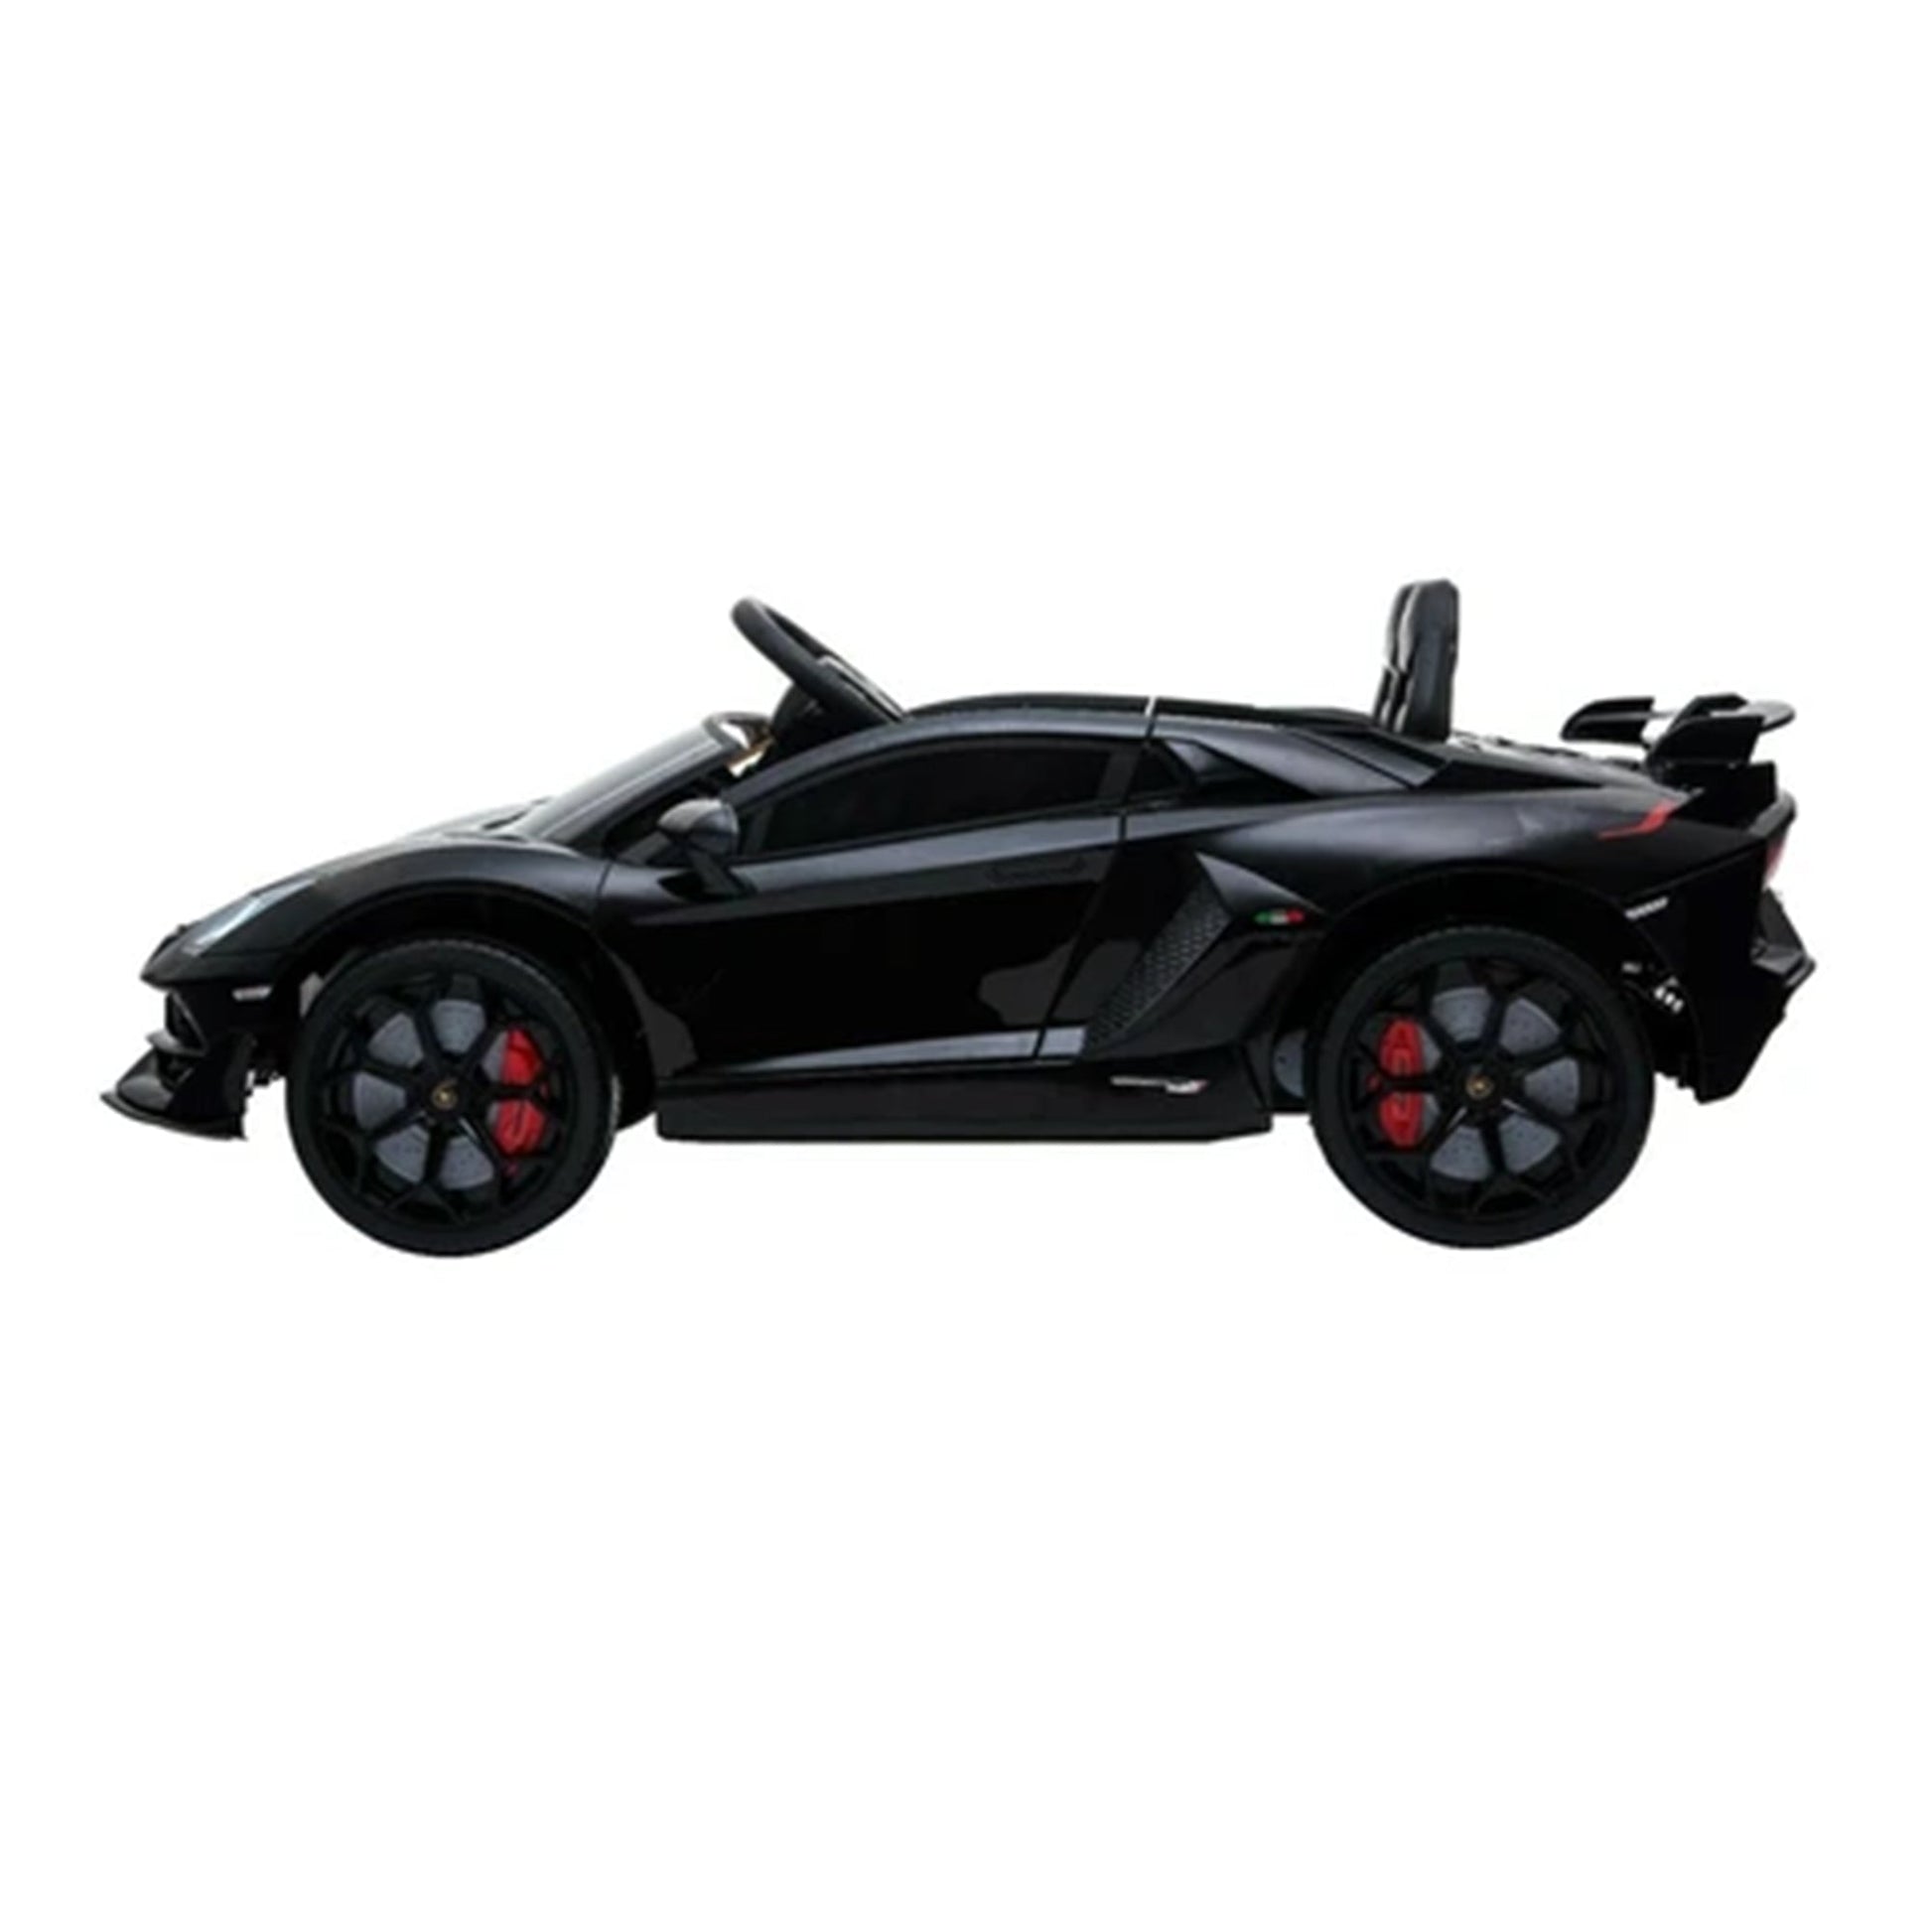 "Matt Black Lamborghini SVJ Kids Ride On from My Store with parent remote. Manufactured by Lamborghini, 12 Volt sports car on a white background."